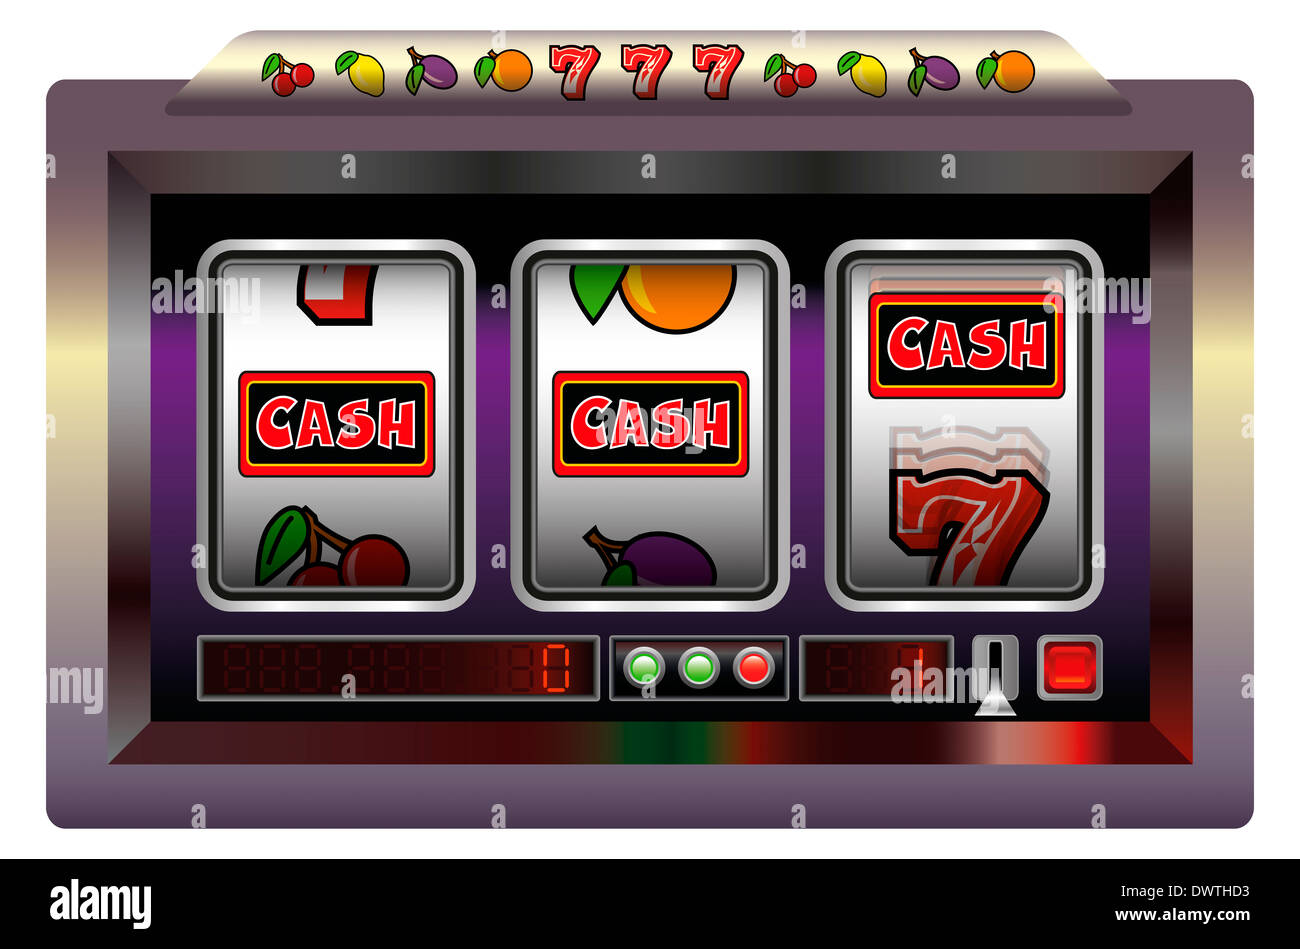 Illustration of a slot machine with three reels, slot machine symbols and the lettering CASH. Stock Photo